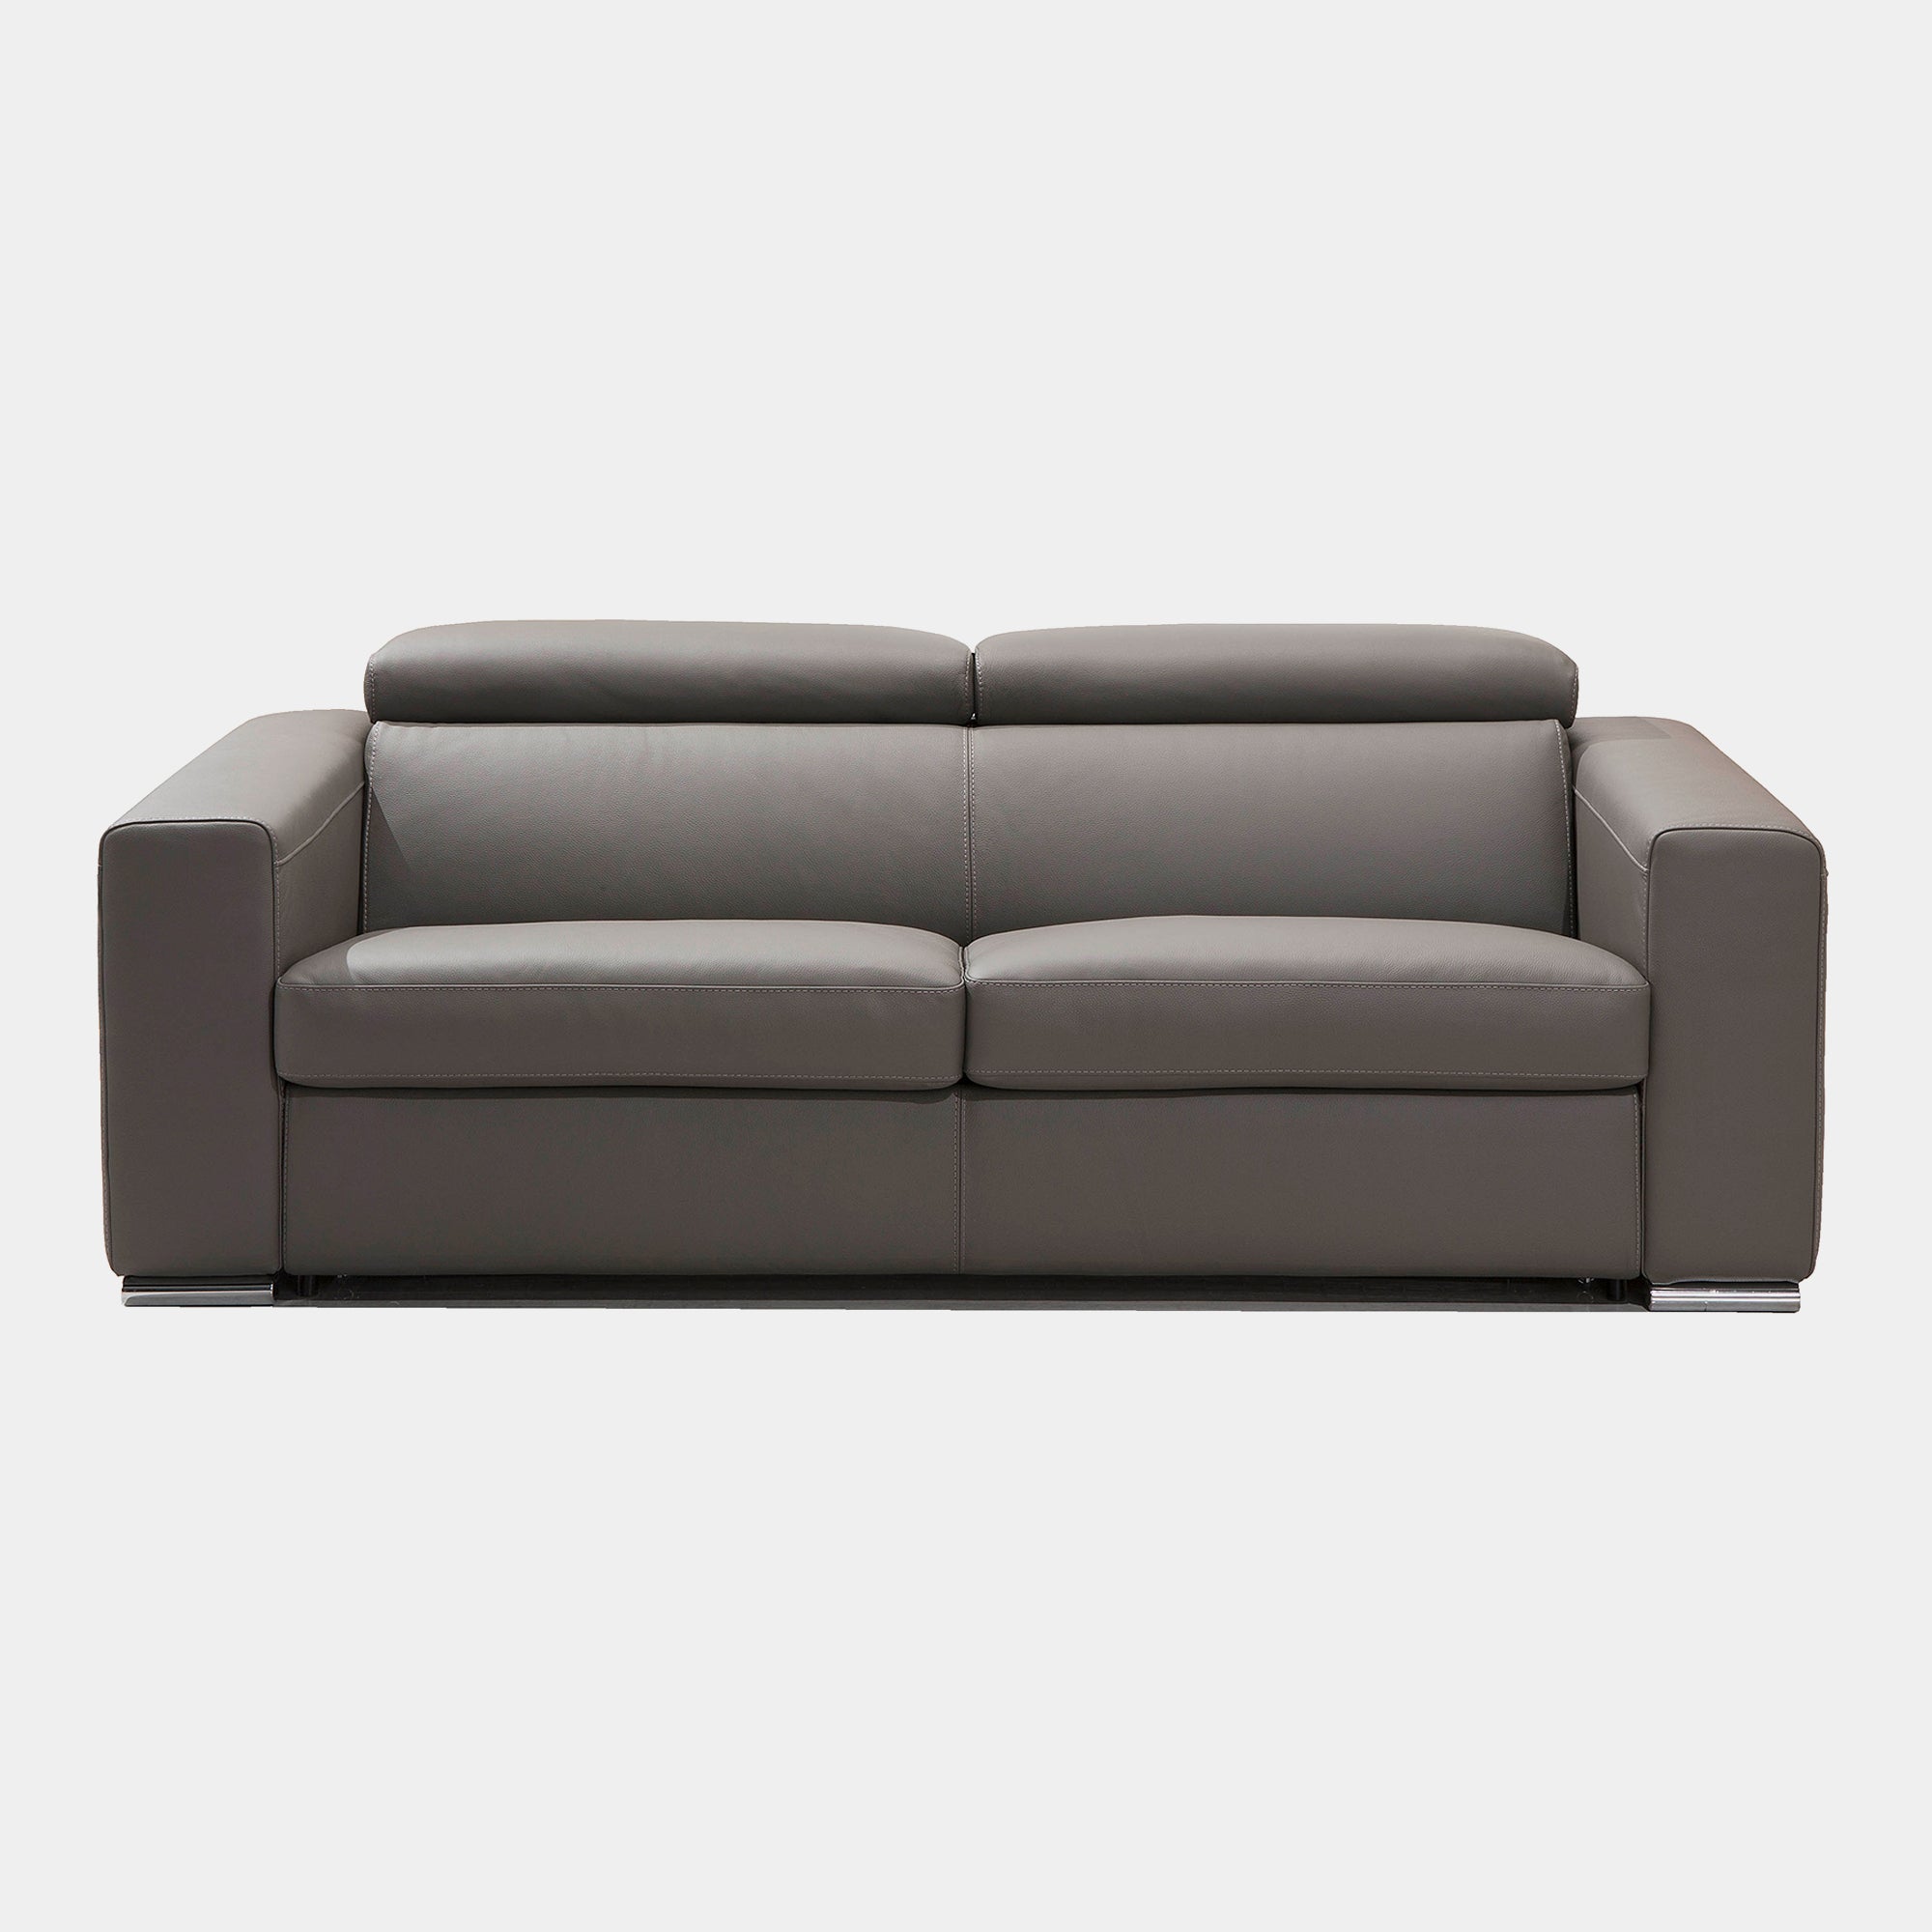 Riccardo - 3 Seat Sofa In Fabric Or Leather Leather Cat B